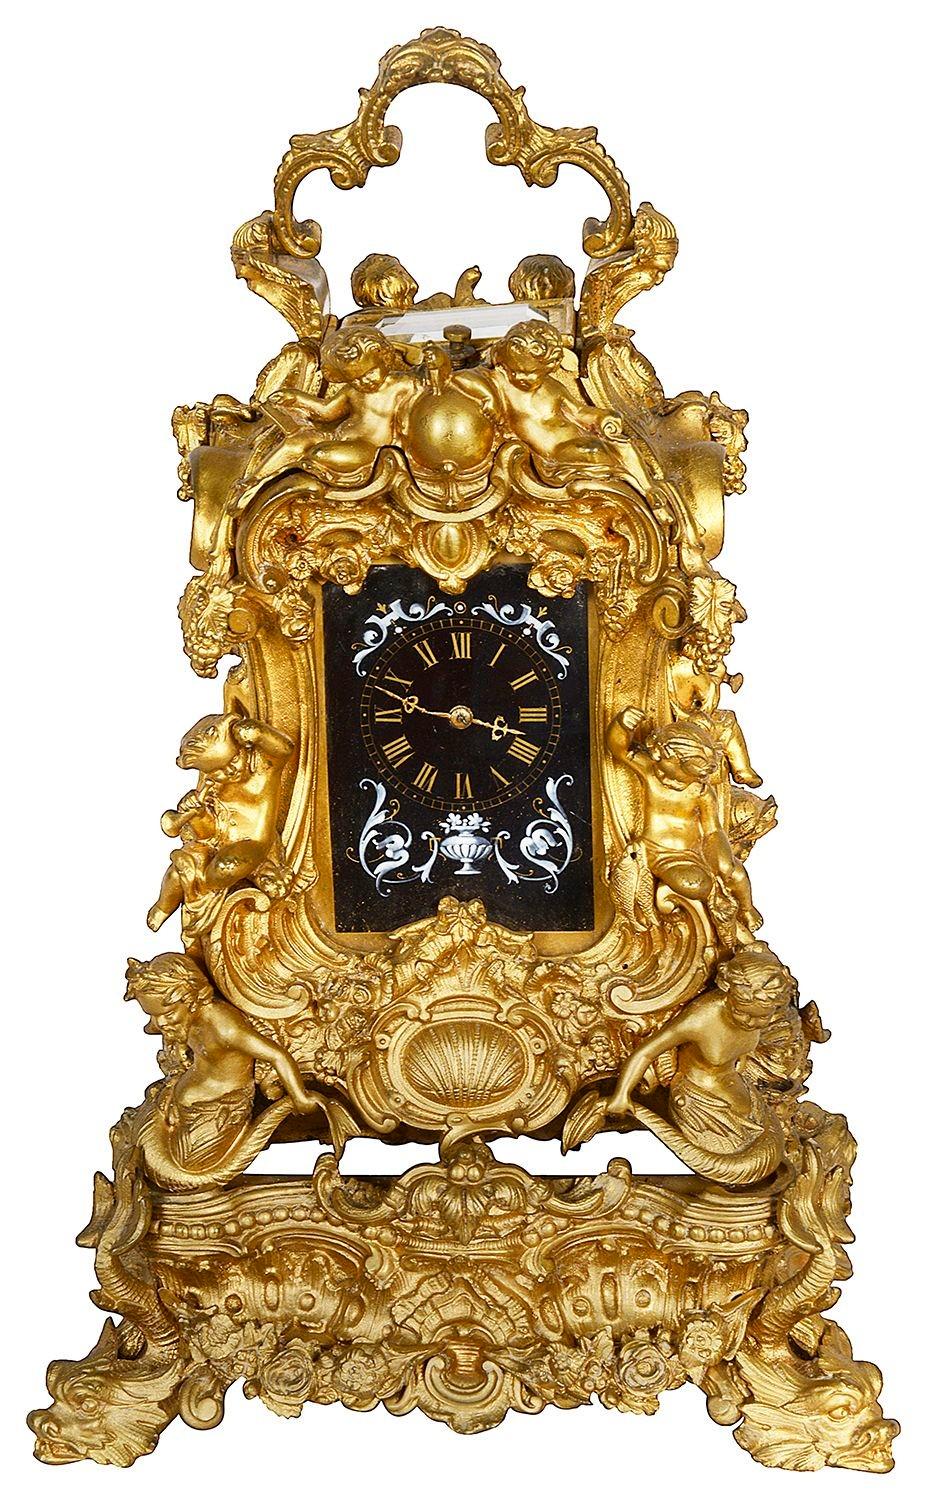 A late 19th Century French gilded ormolu ornate carriage clock. Having this wonderful scrolling foliate Rococo style case with numerous seated putti picking fruits, inset hand painted porcelain panels depicting cupids, supported by mermaids and